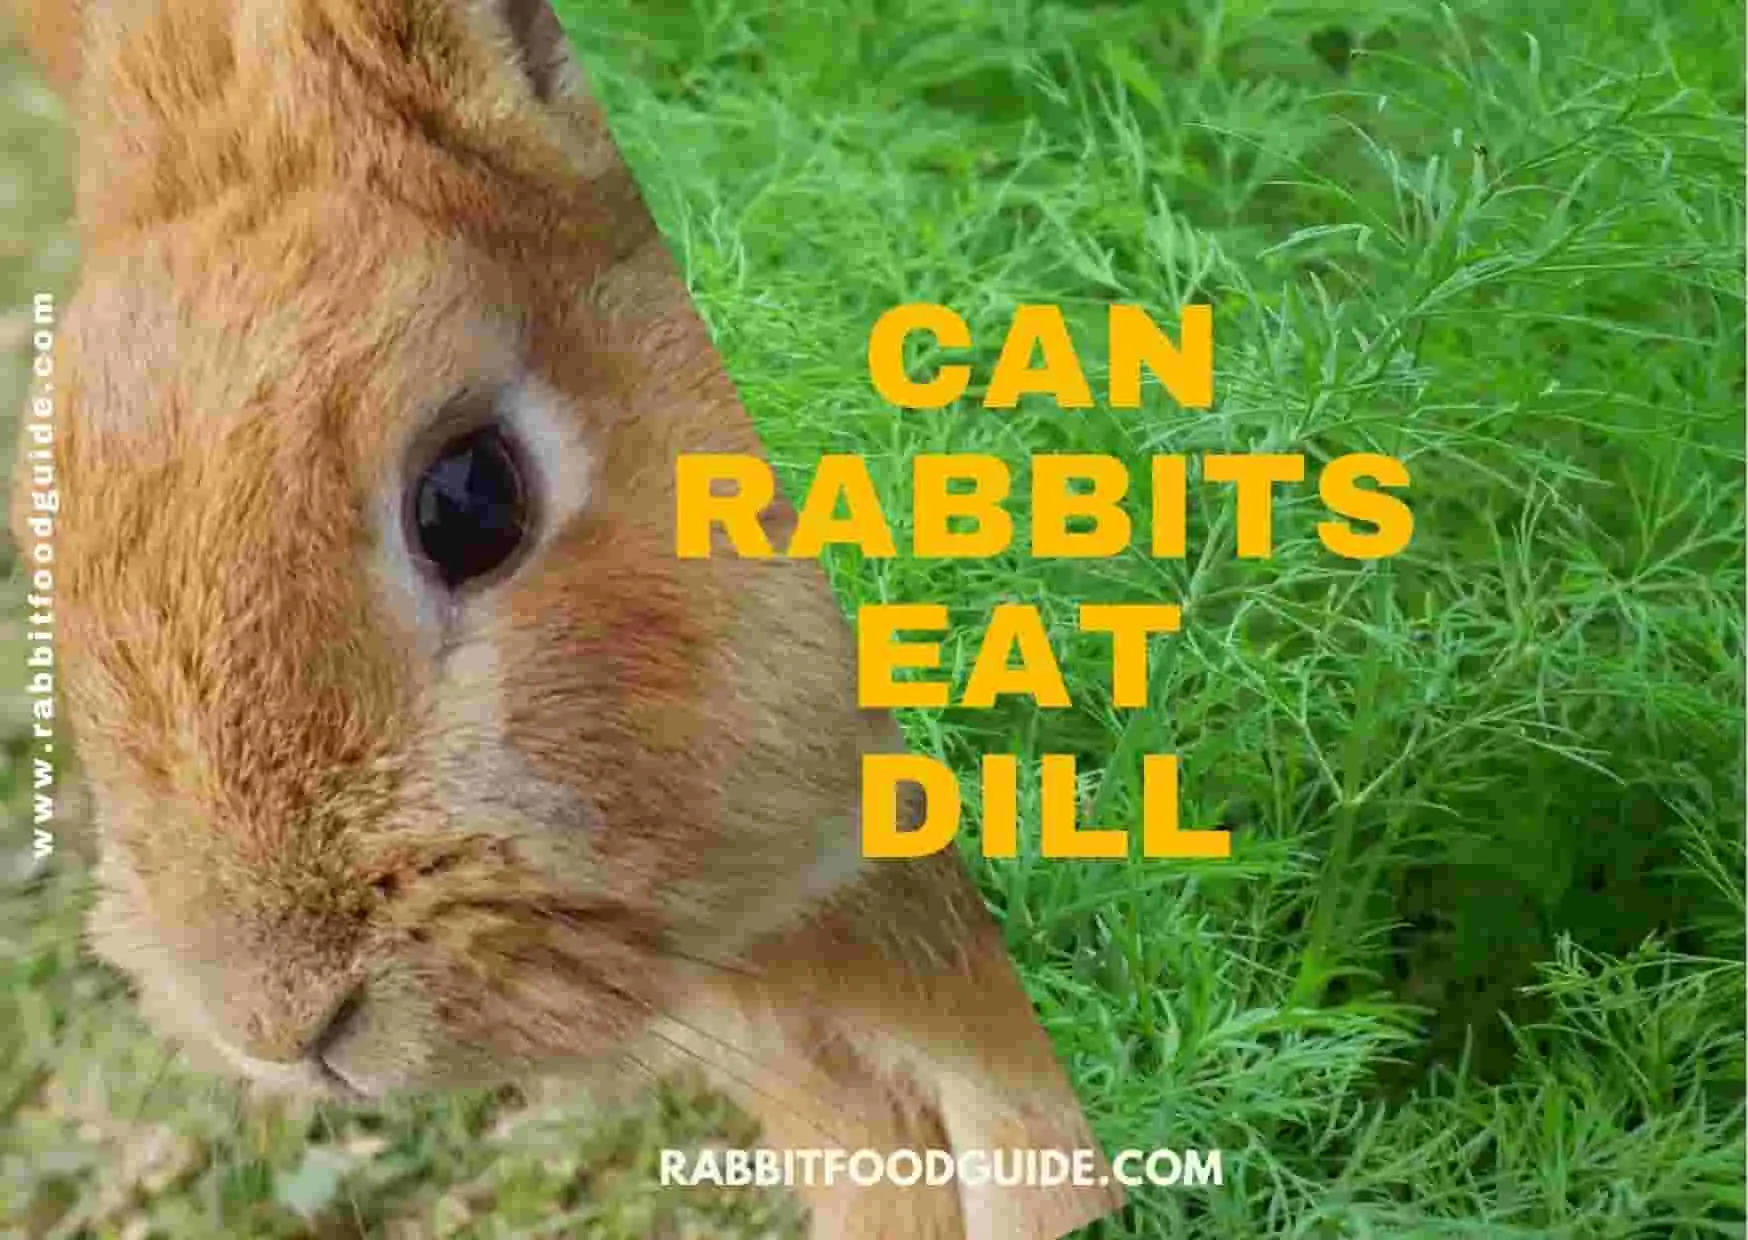 can rabbits eat dill